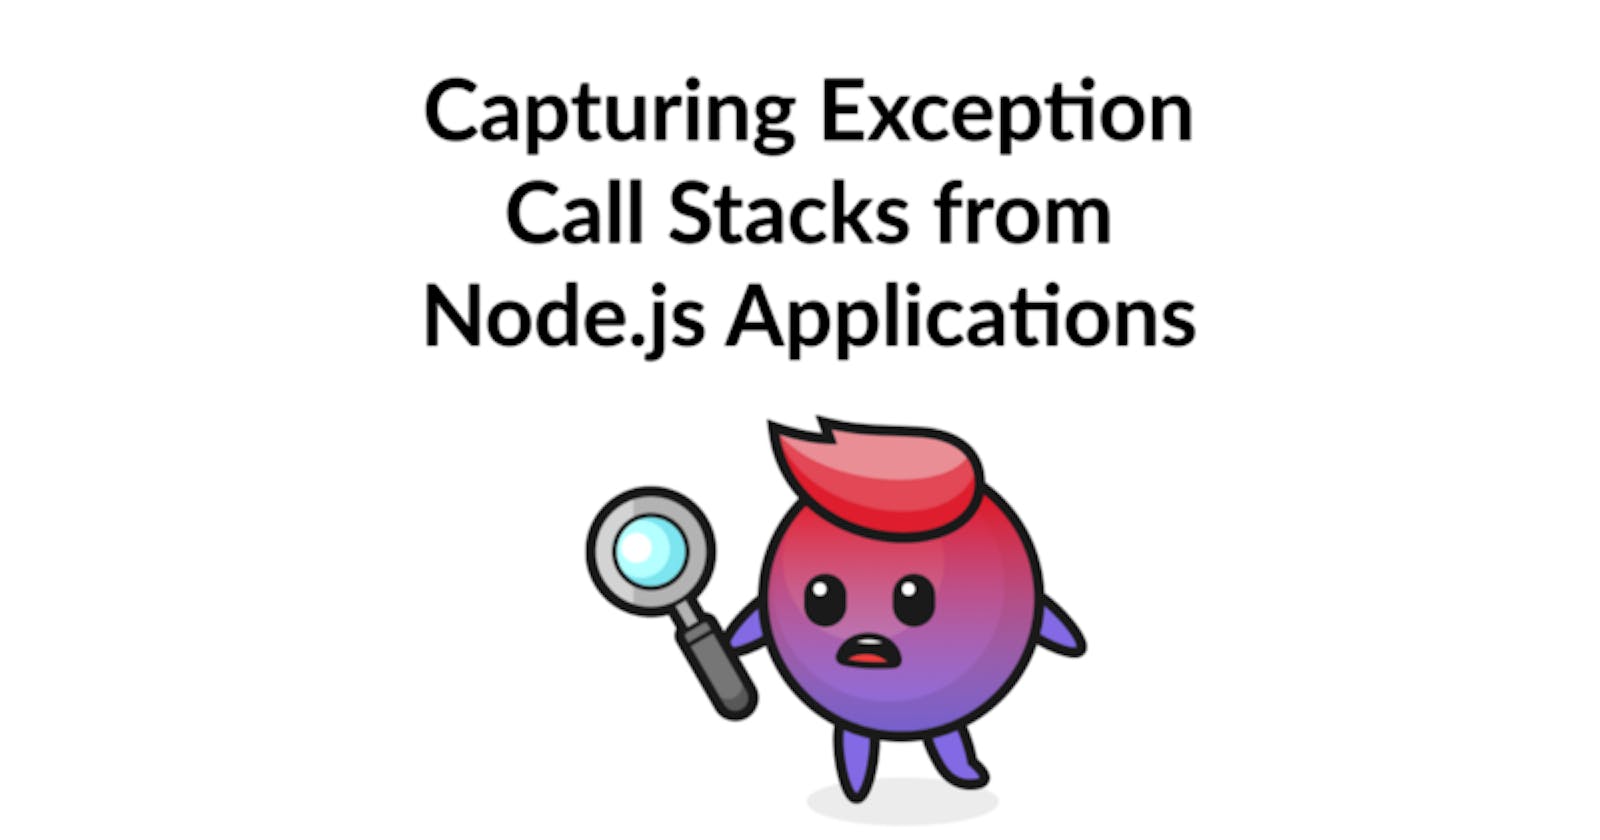 Capturing Exception Call Stacks from Node.js Applications